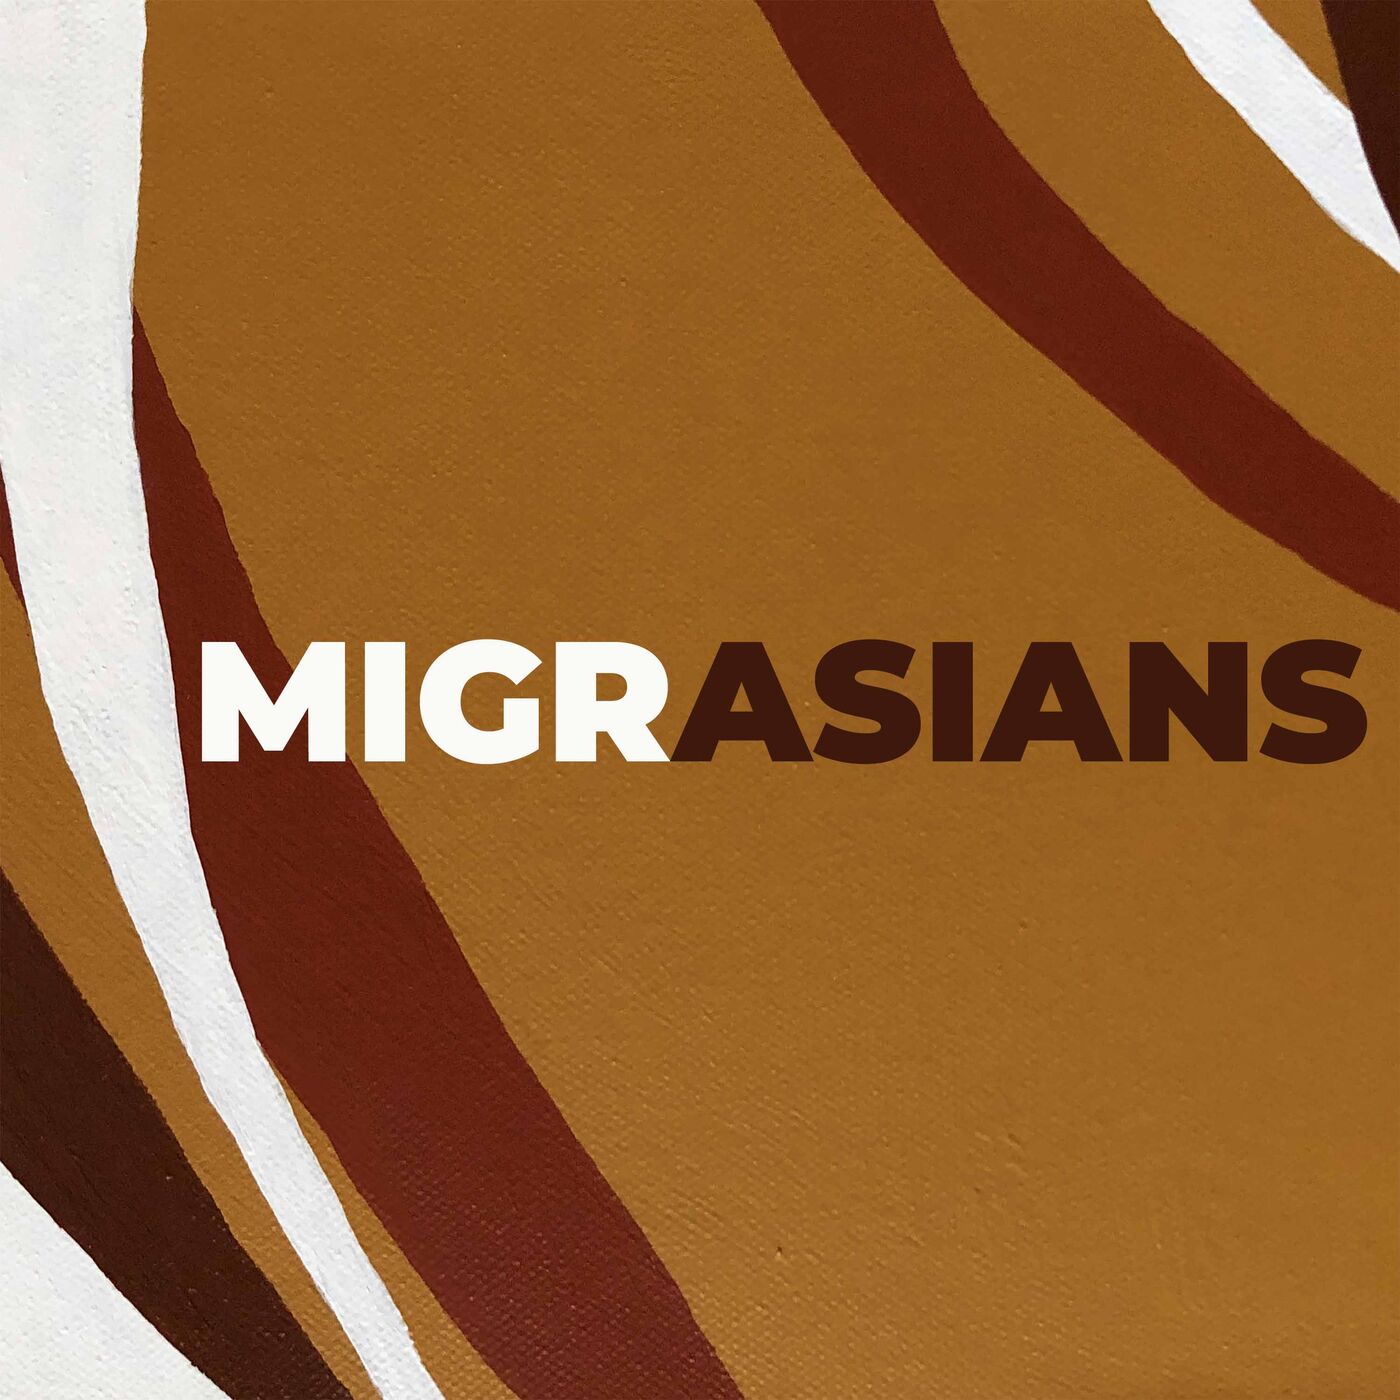 Welcome to MigrAsians!